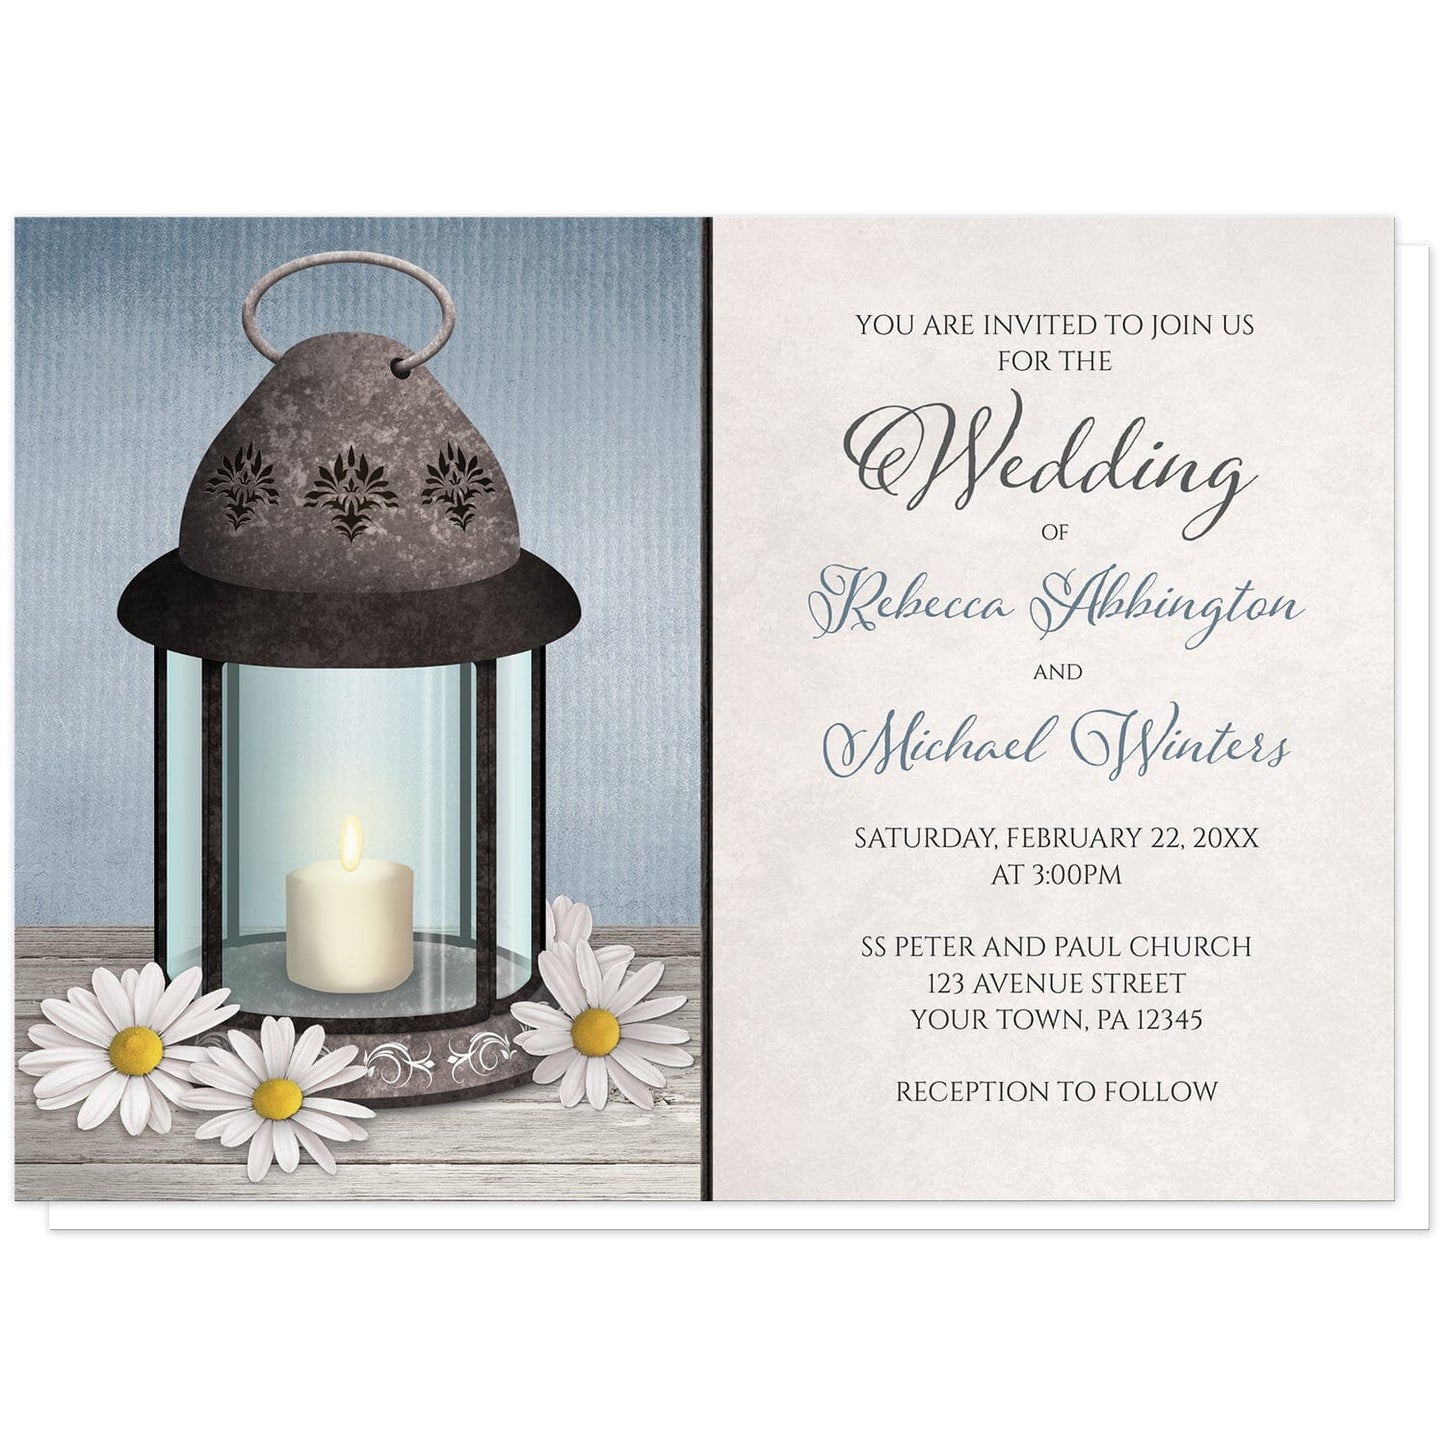 Lantern Daisy Rustic Blue Wedding Invitations at Artistically Invited. Country-inspired lantern daisy rustic blue wedding invitations featuring an old but elegant ornate metal lantern with a lit candle inside and daisies around it on a light wood tabletop, over a rustic blue background. Your personalized wedding details are custom printed in gray and blue over a light parchment background design, beside the lantern illustration.